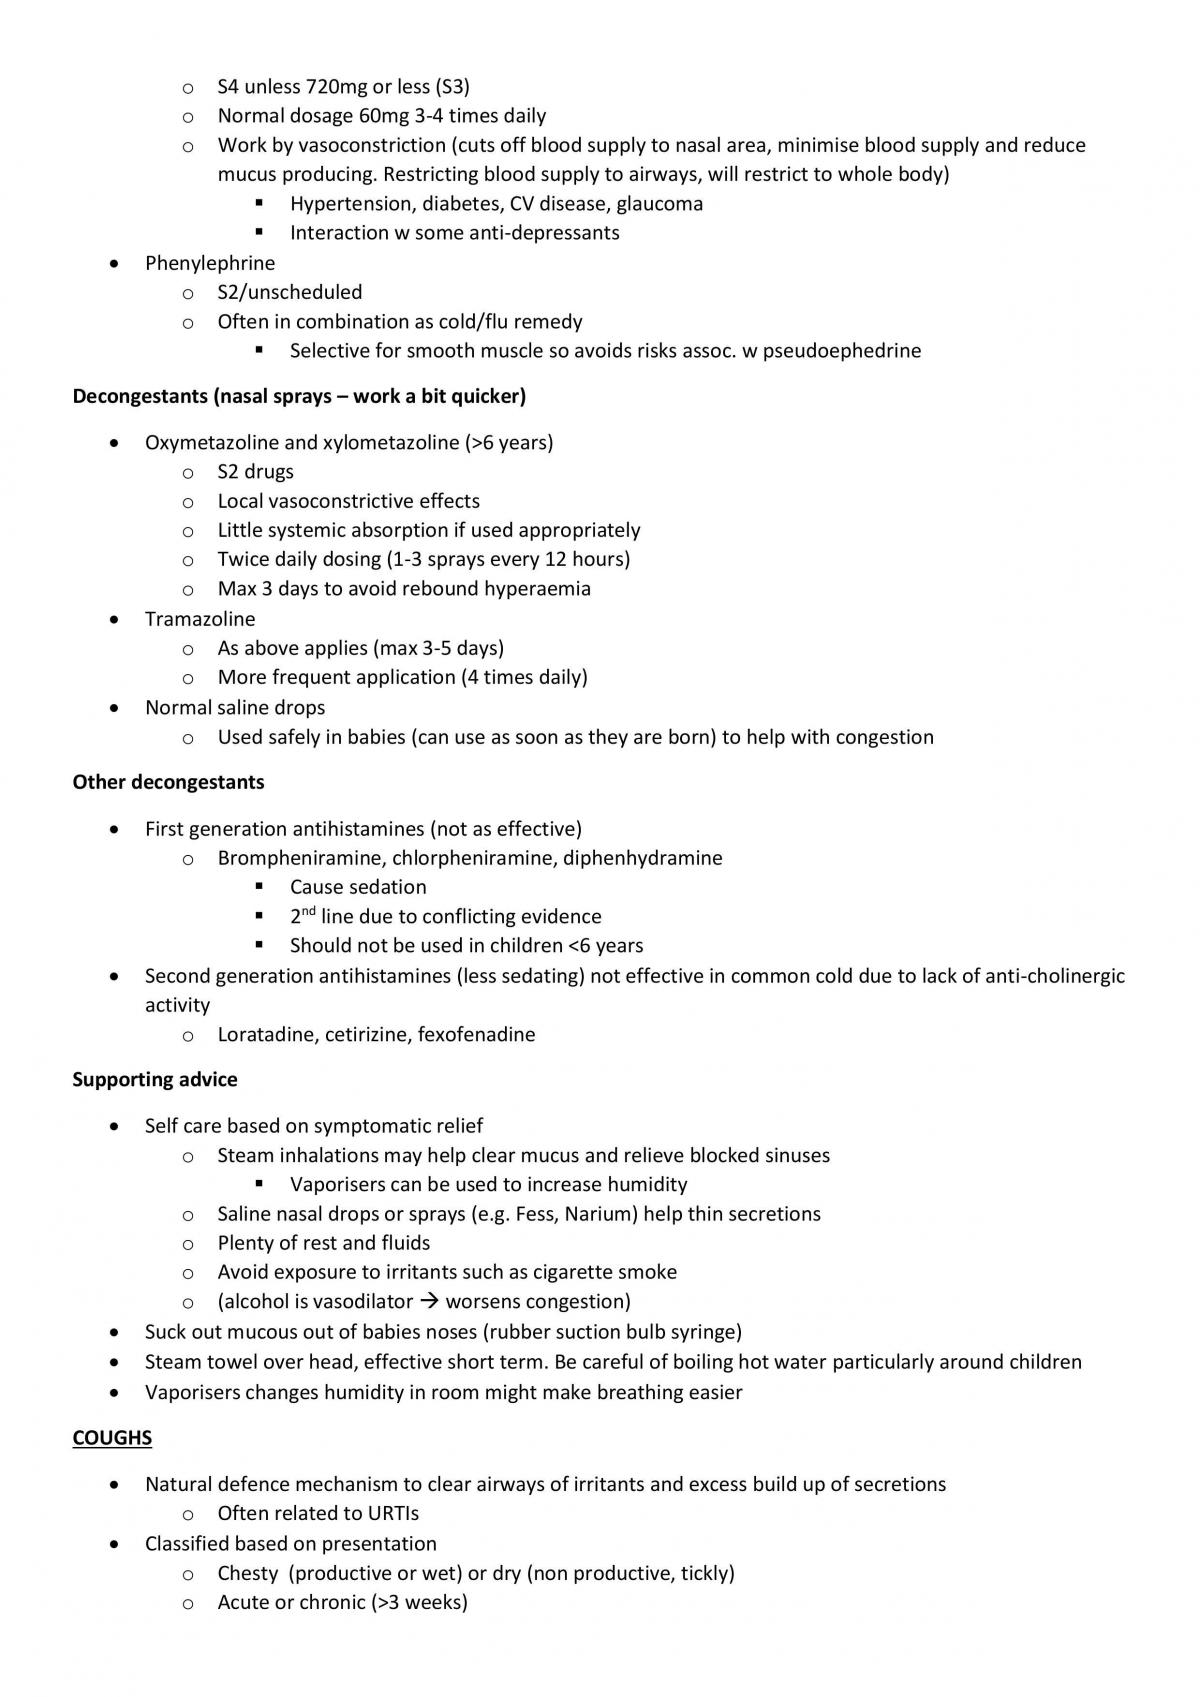 Gastro and Respiratory Health Study Notes - Page 12